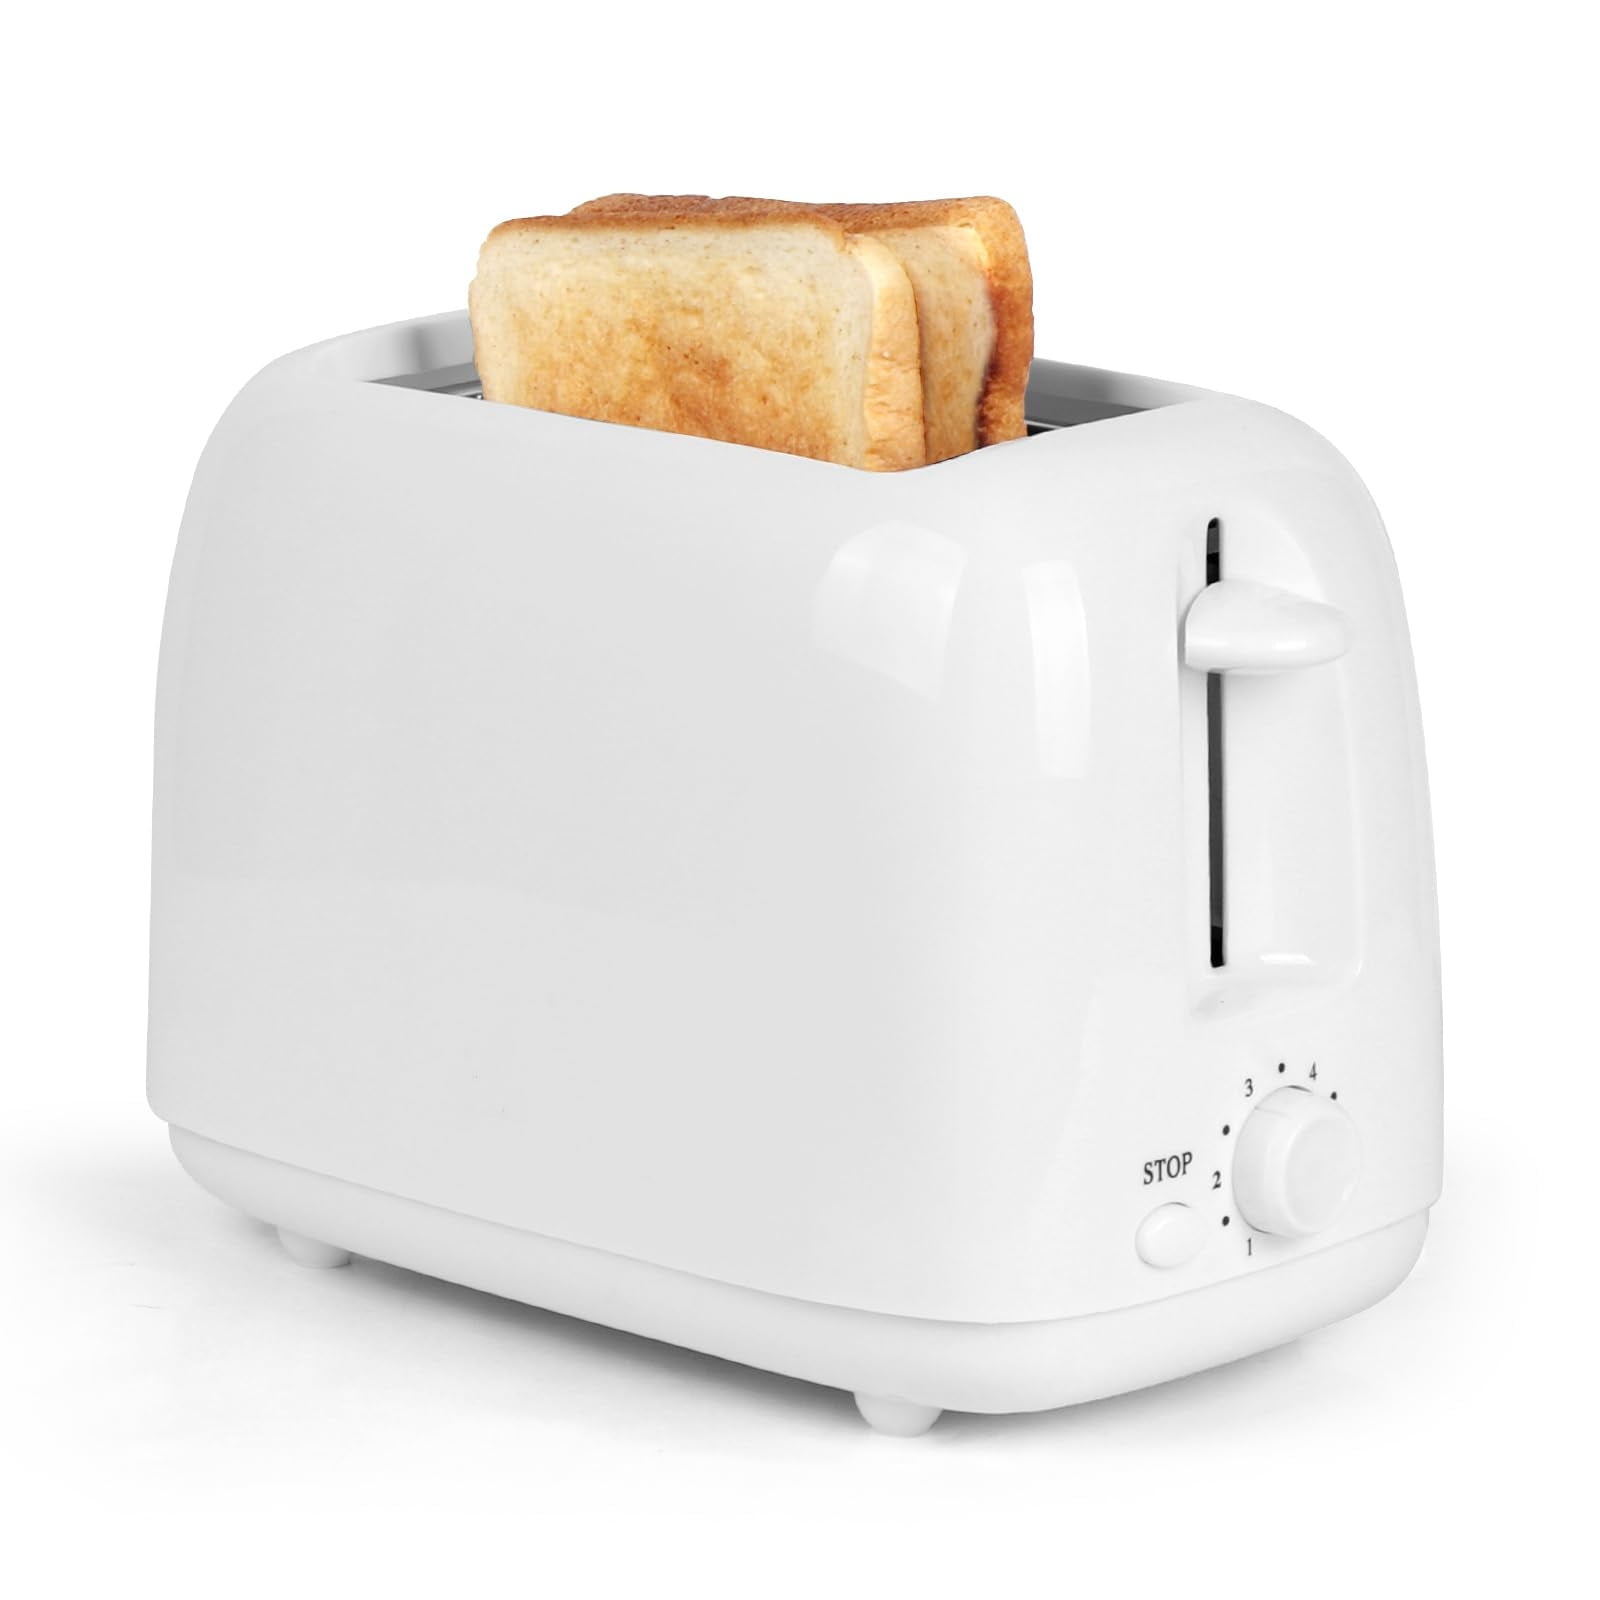 Peach Street 2 Slice Toaster Compact Bread Toaster with Digital Countdown,  Wide Slots, Auto-Pop Stainless Steel, 6 Browning Levels, Removable Crumb